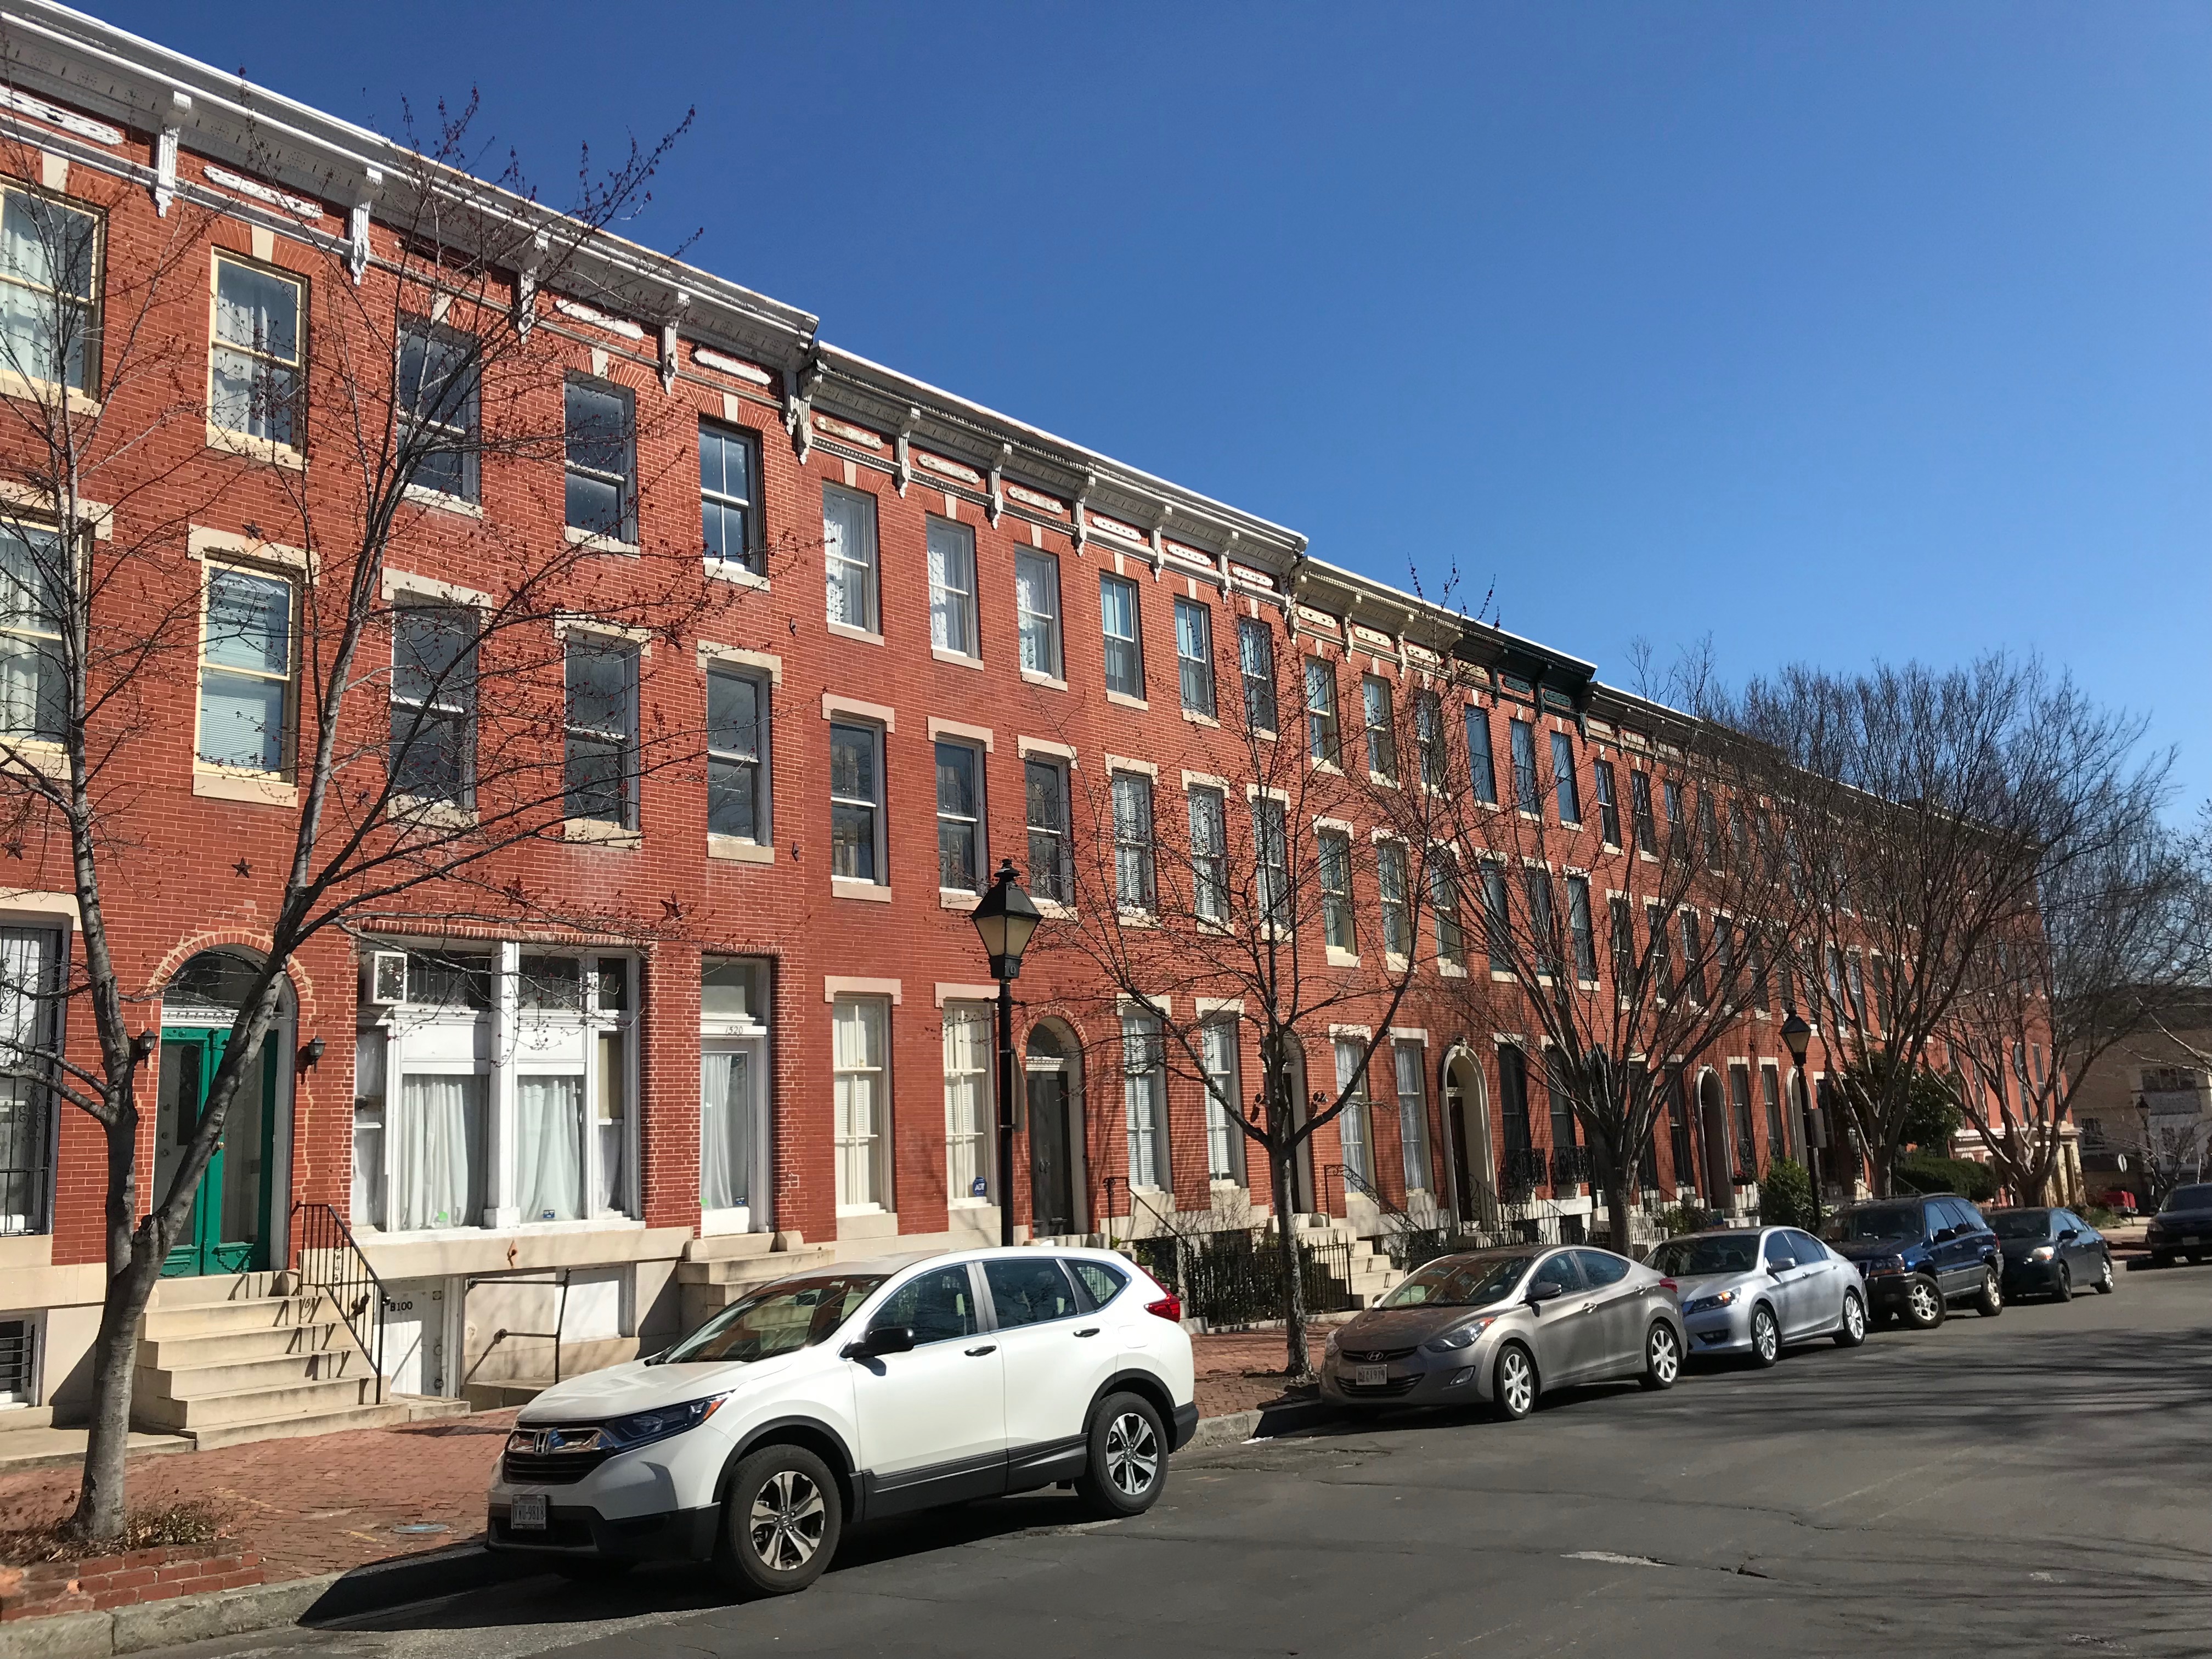 Rowhouses, 1500 block of Hollins Street, Baltimore, MD 21223, Baltimore, Building, Car, Hollins Street, HQ Photo